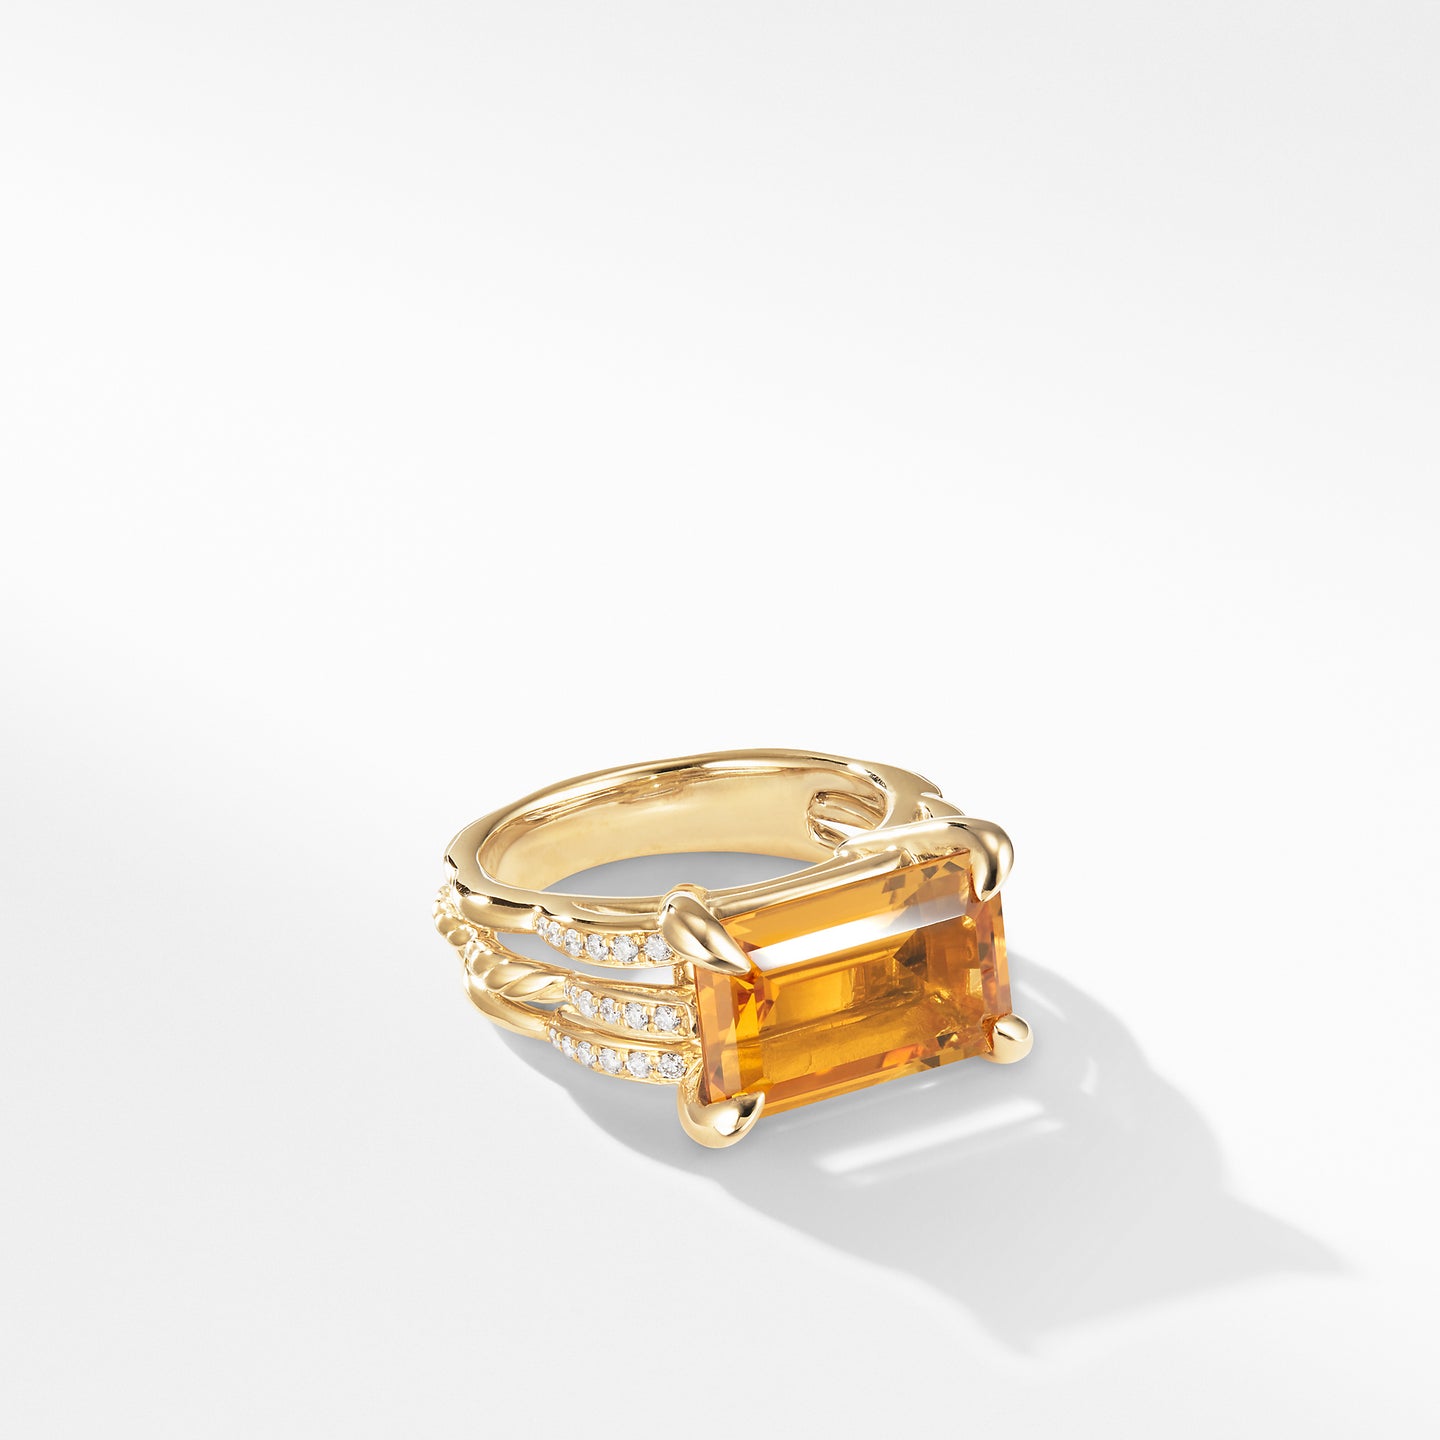 Tides Ring in 18K Yellow Gold with Citrine and Diamonds, Size 6